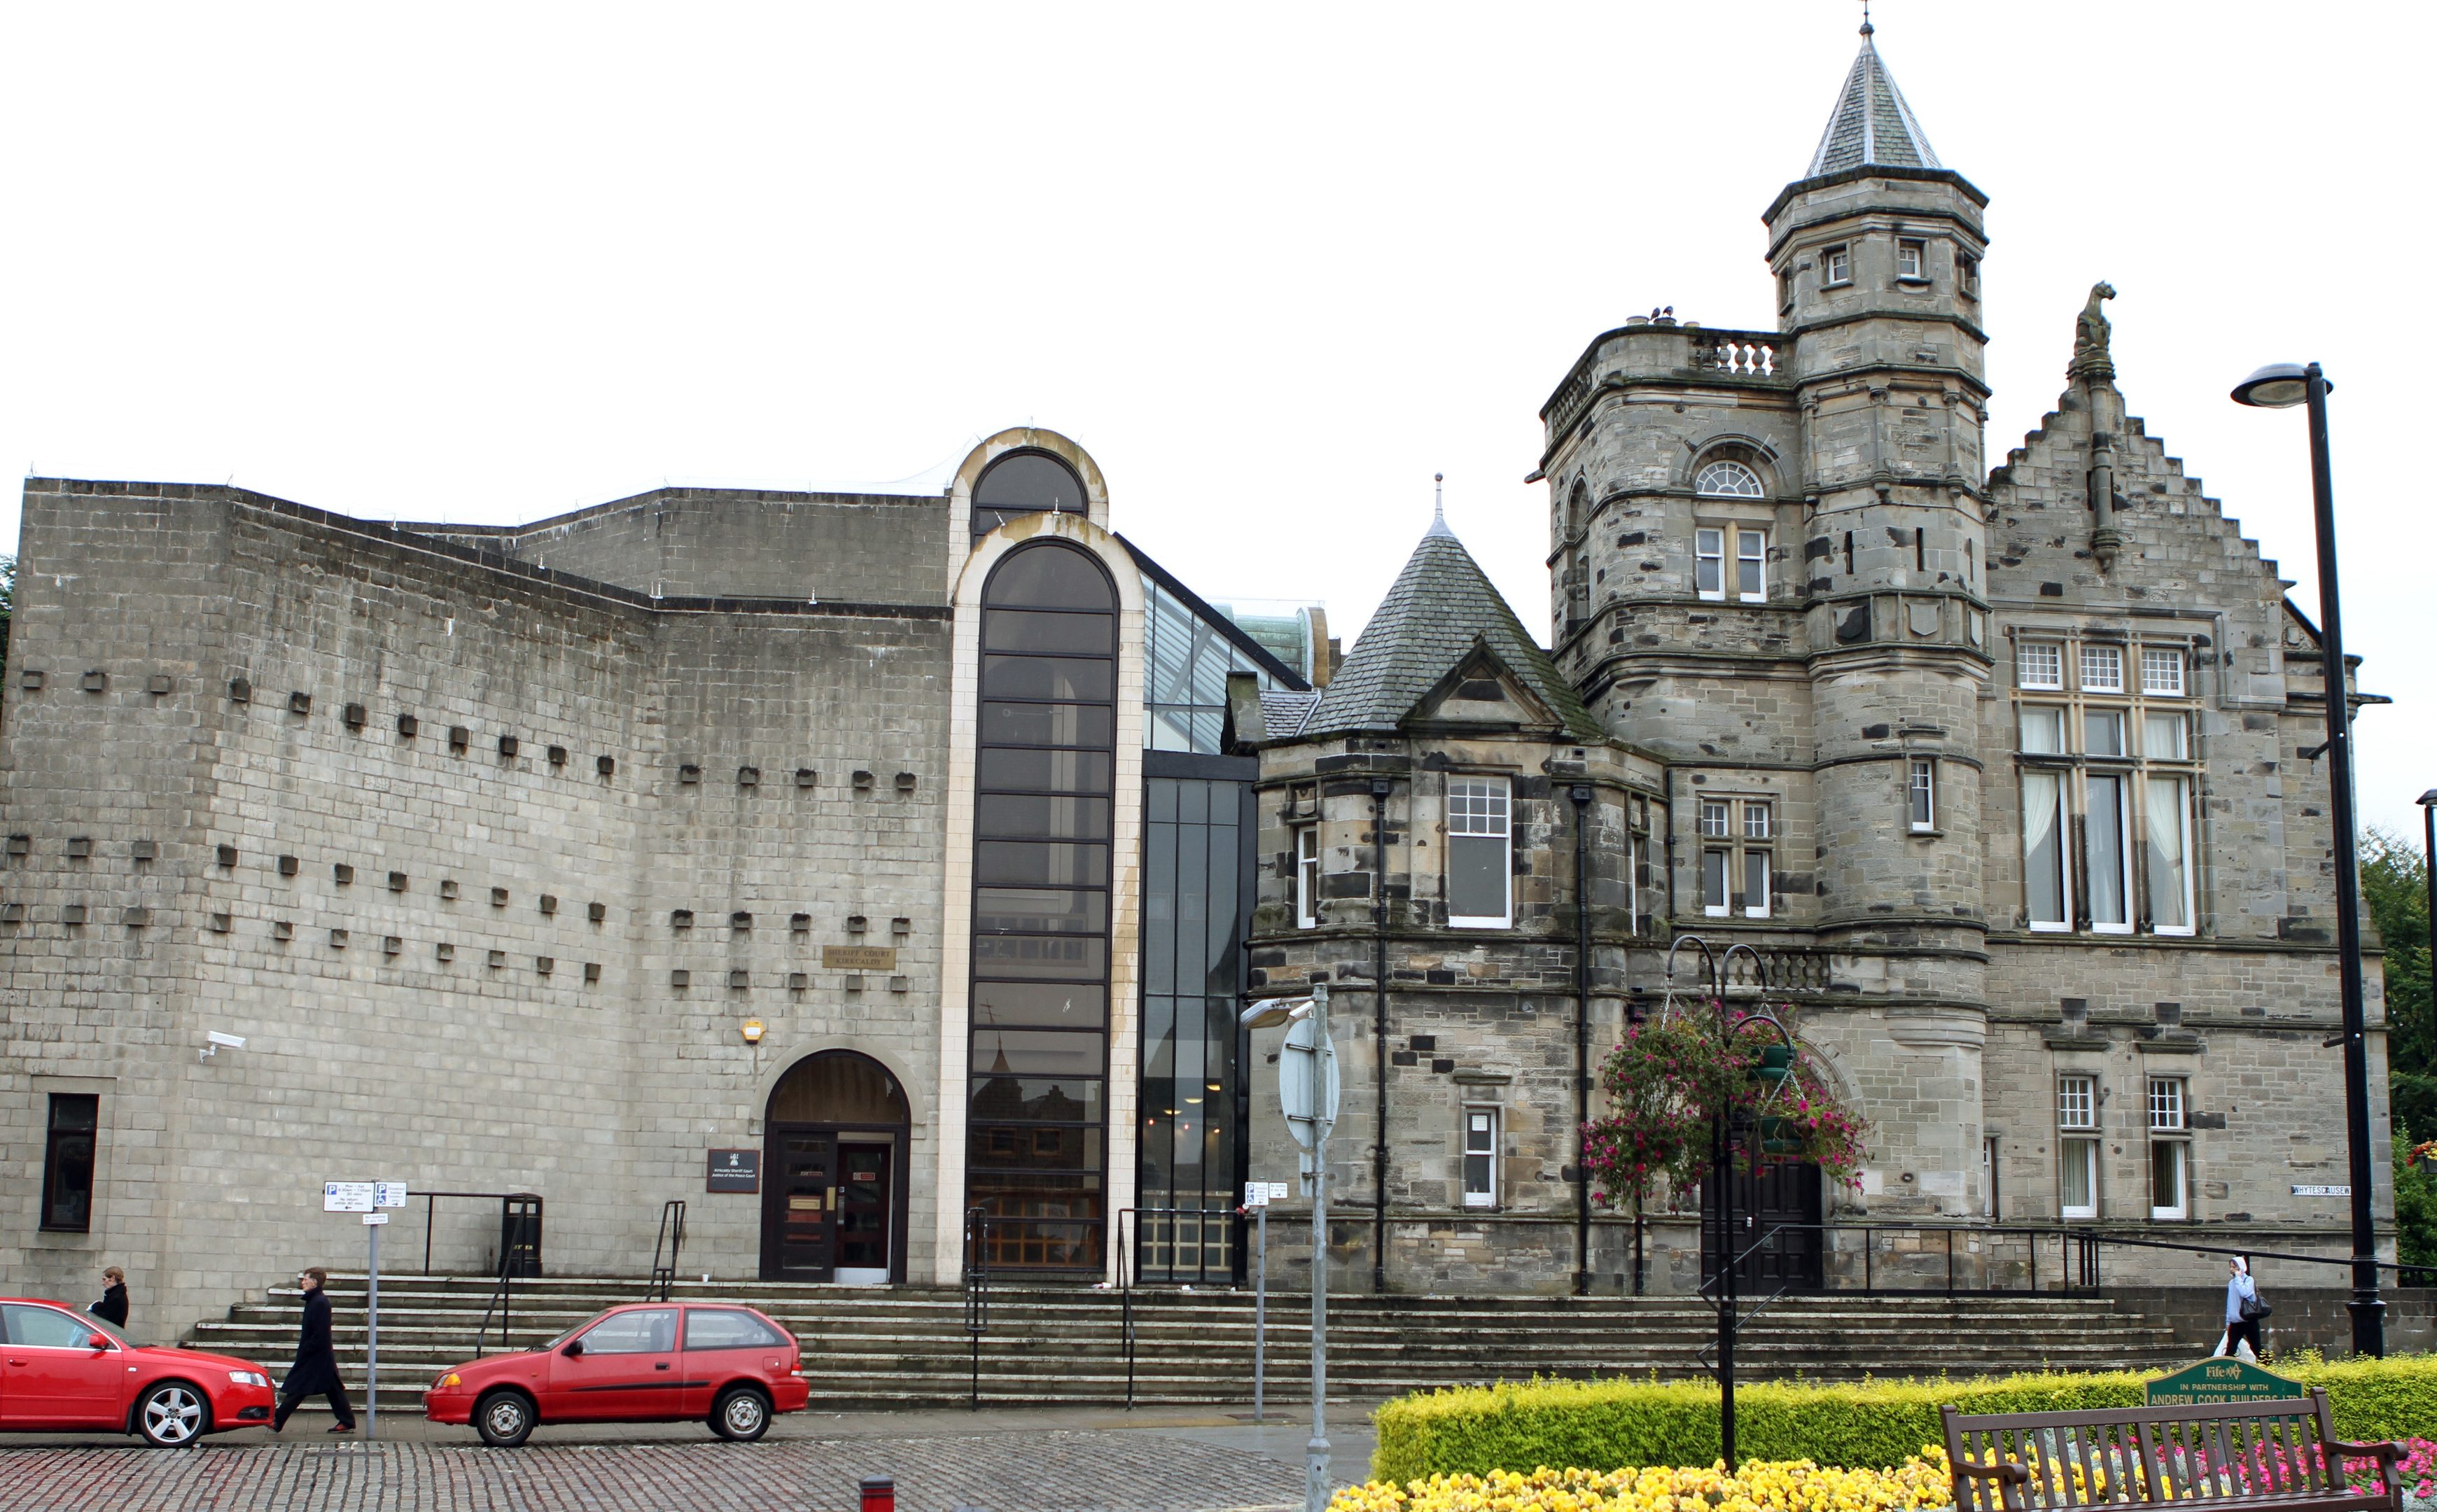 The trial will take place at Kirkcaldy Sheriff Court.